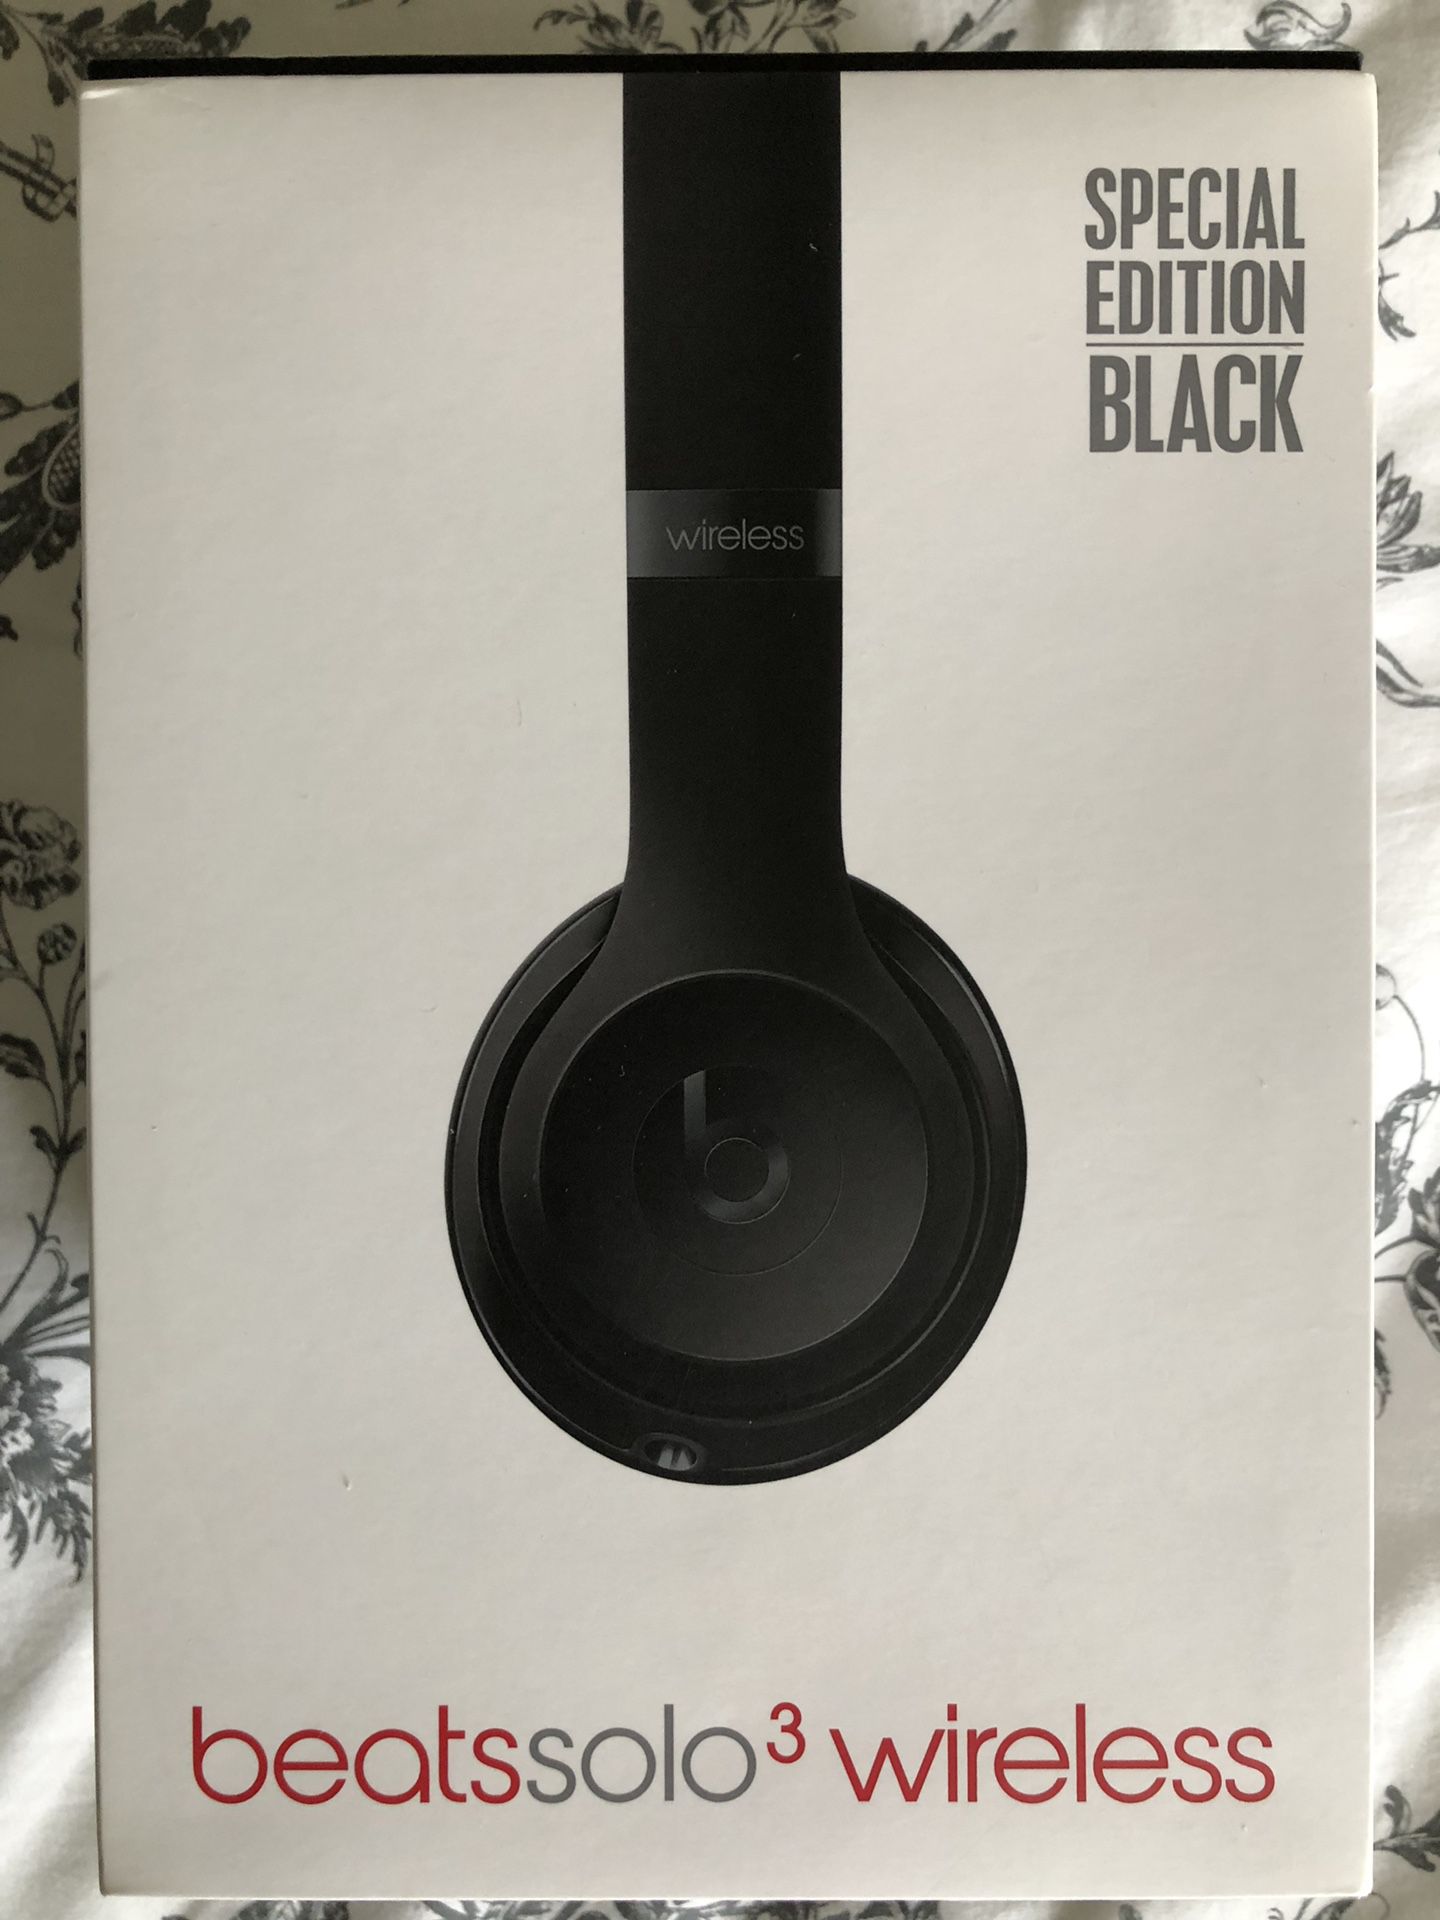 Beats solo 3 wireless Special Edition